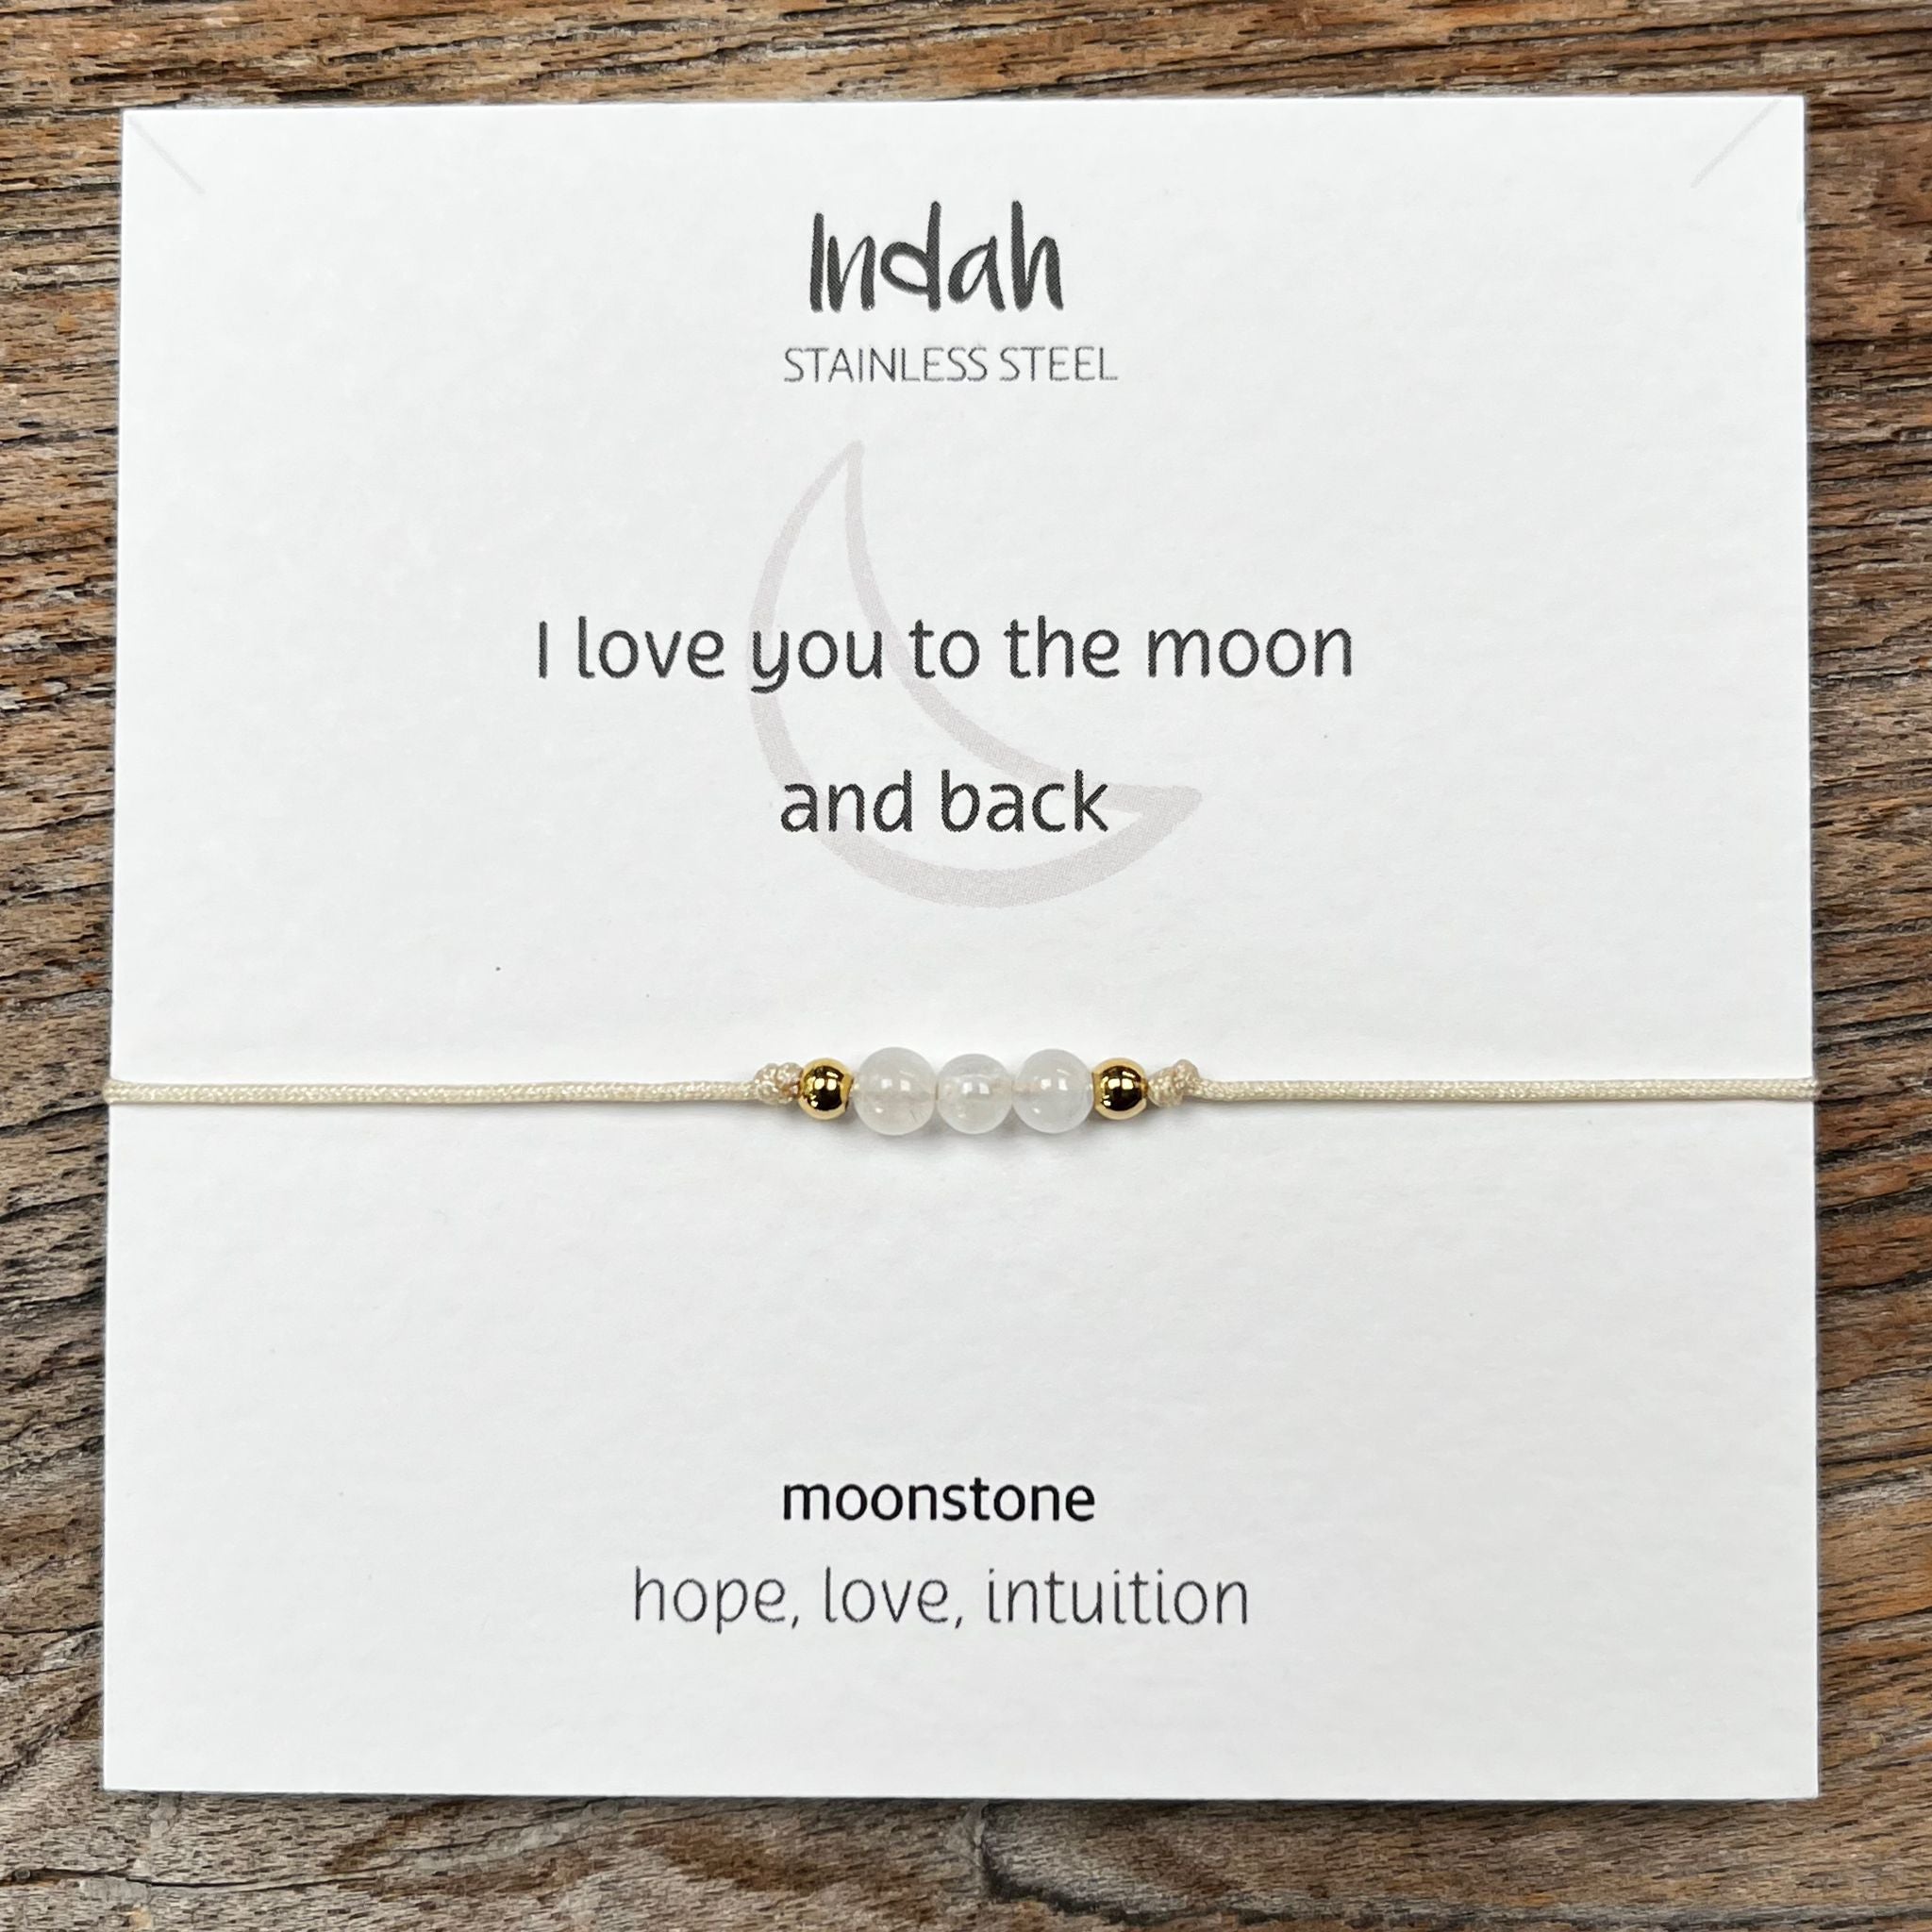 I love you to the moon and back - Moonstone